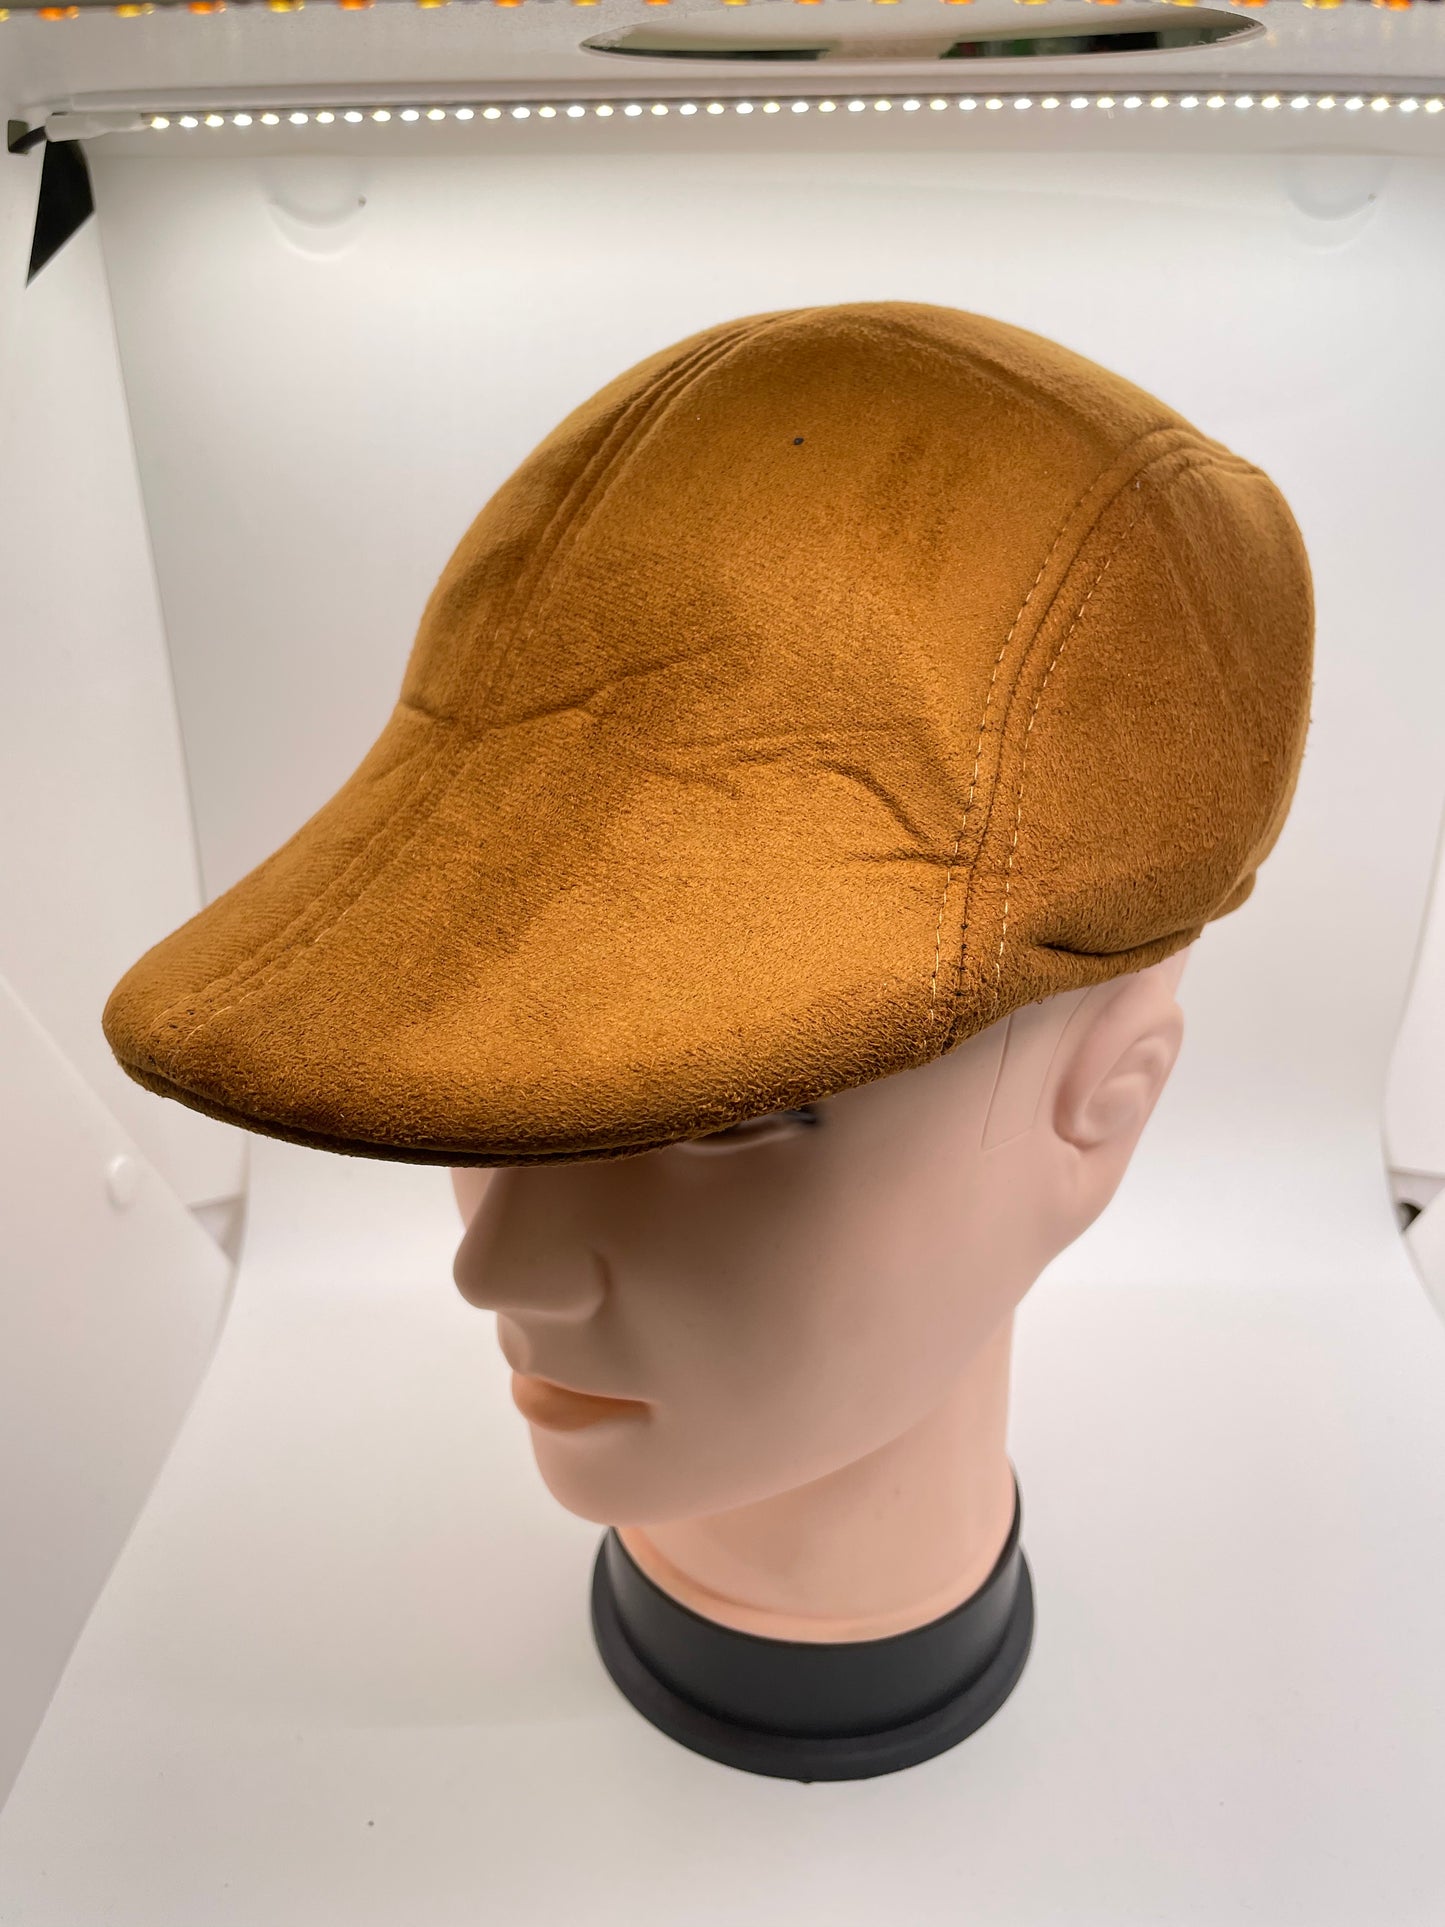 Brown flat hat with a ribbed knit texture and a buckle closure